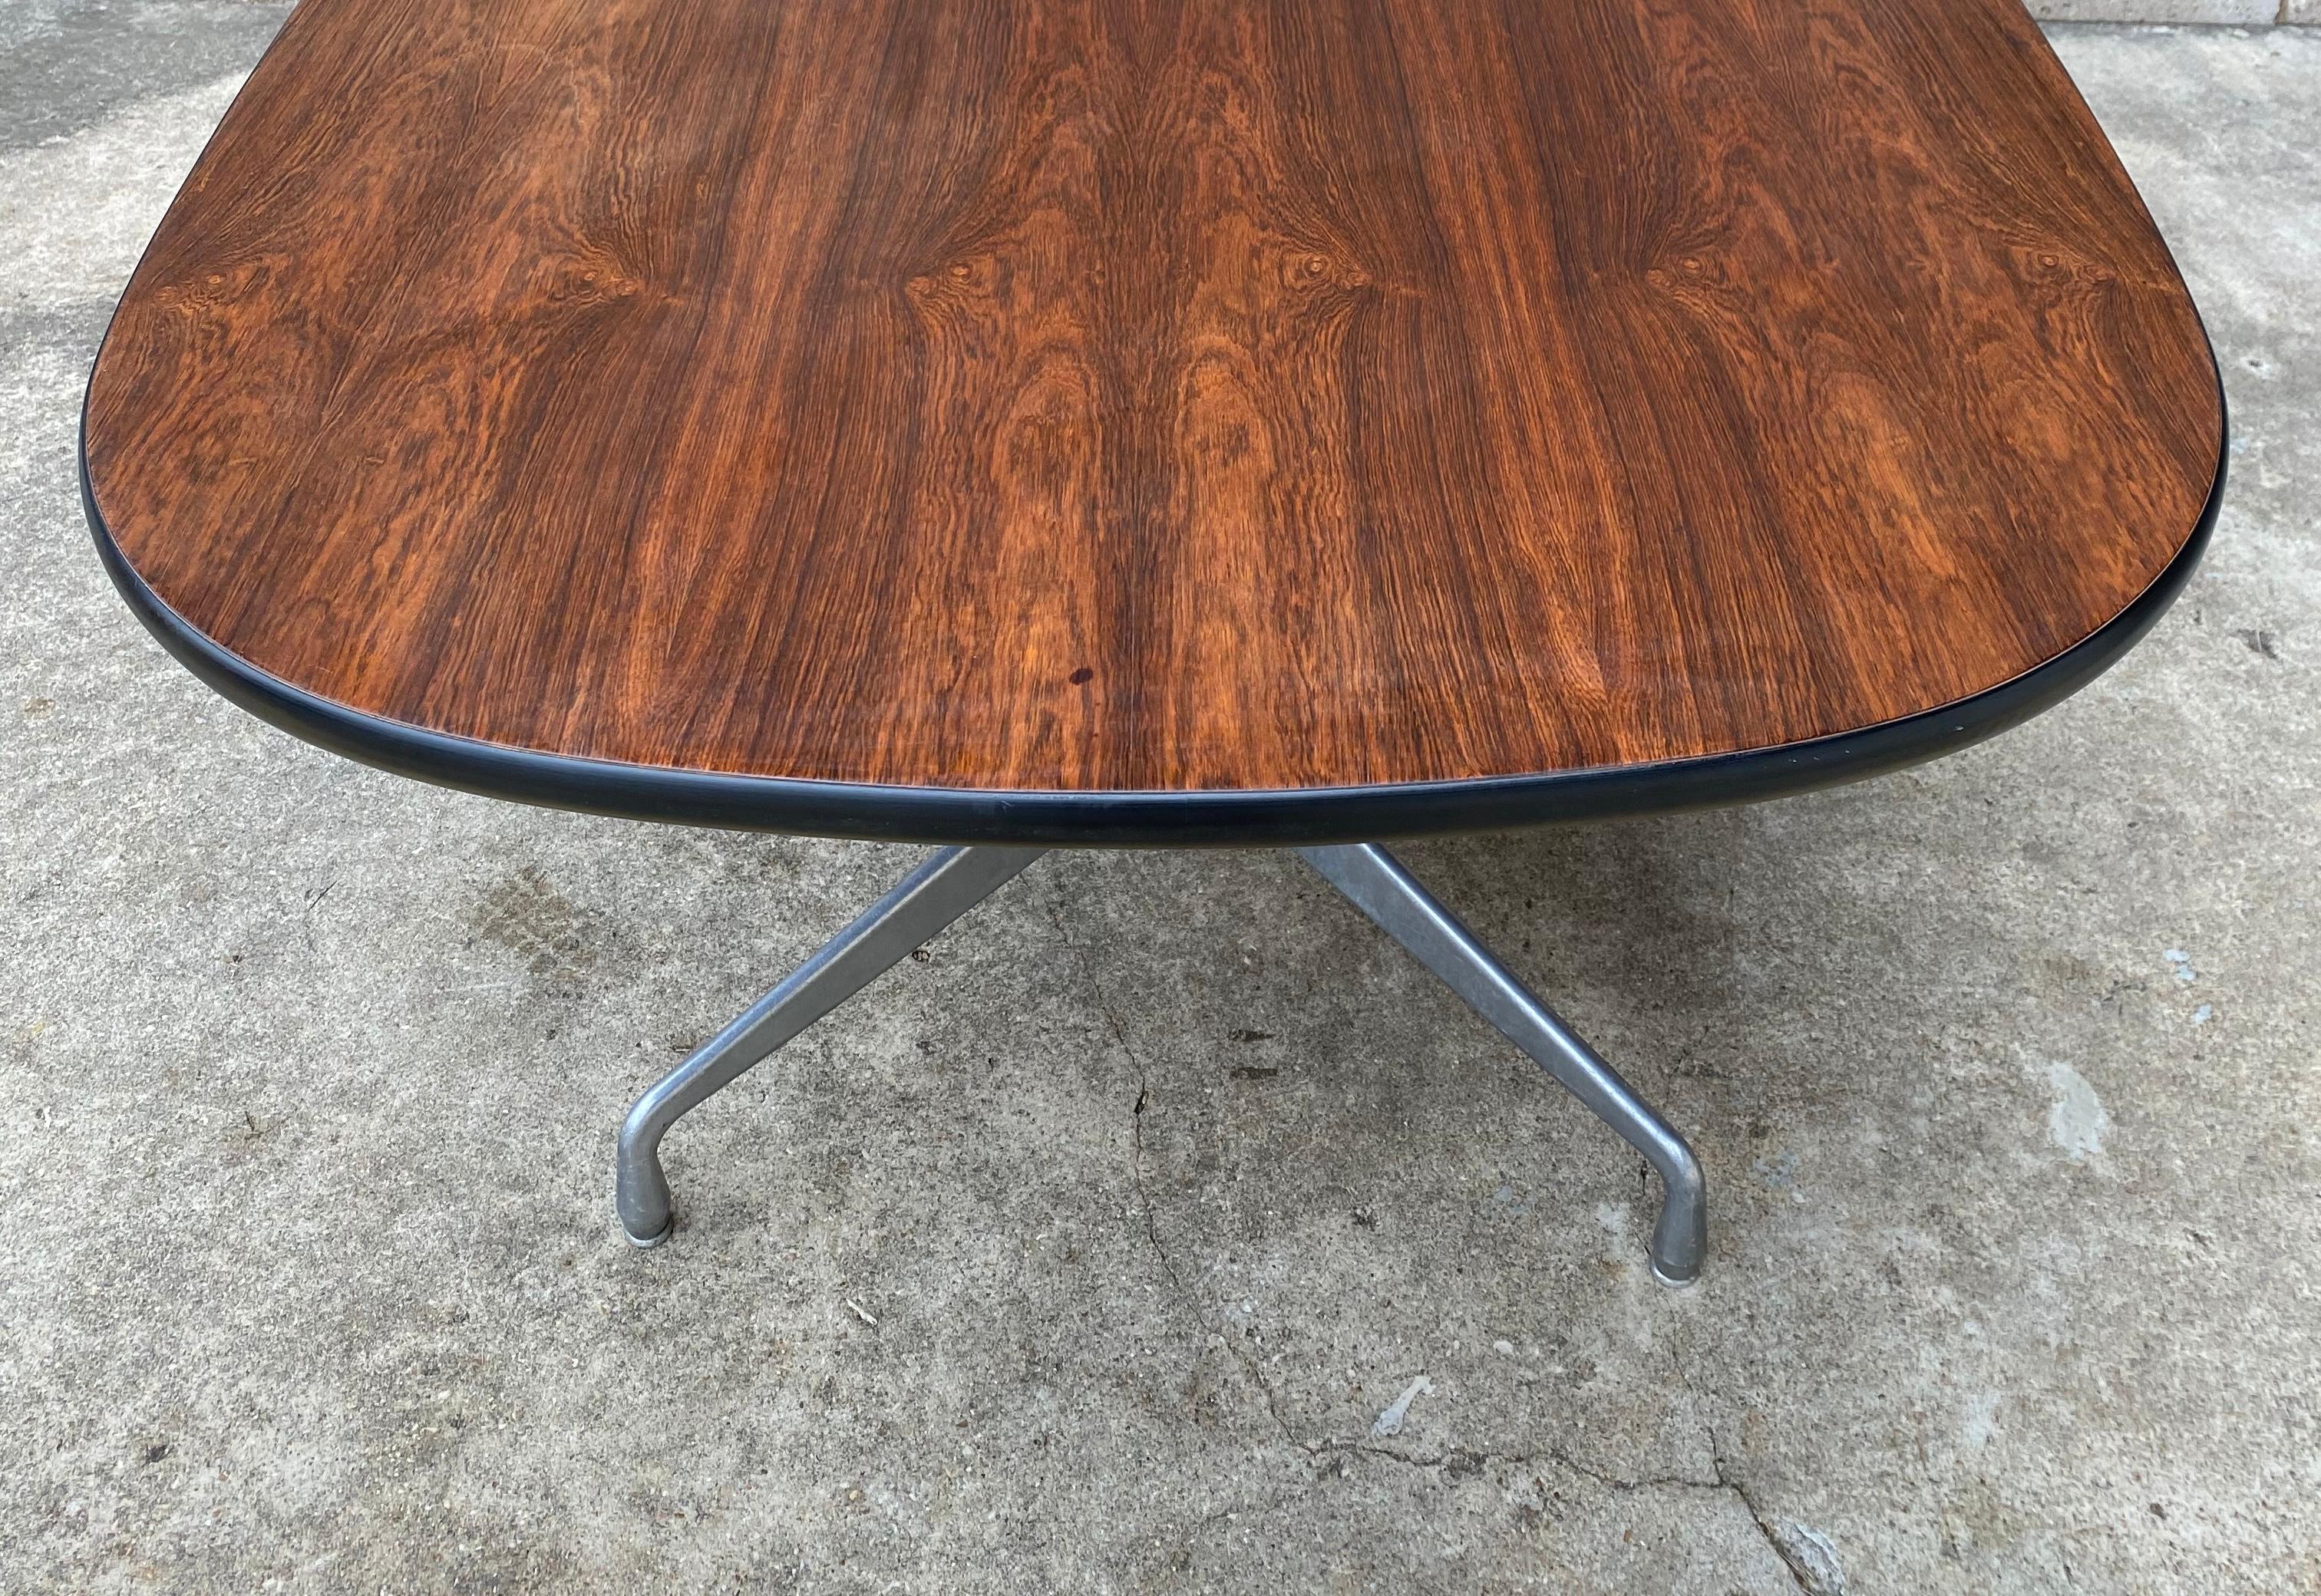 Gorgeous Eames racetrack style table by Herman Miller. Aluminum segmented base and refinished. This was a custom order at the time, and furniture these are increasingly difficult to track down. Refinishing included in price.